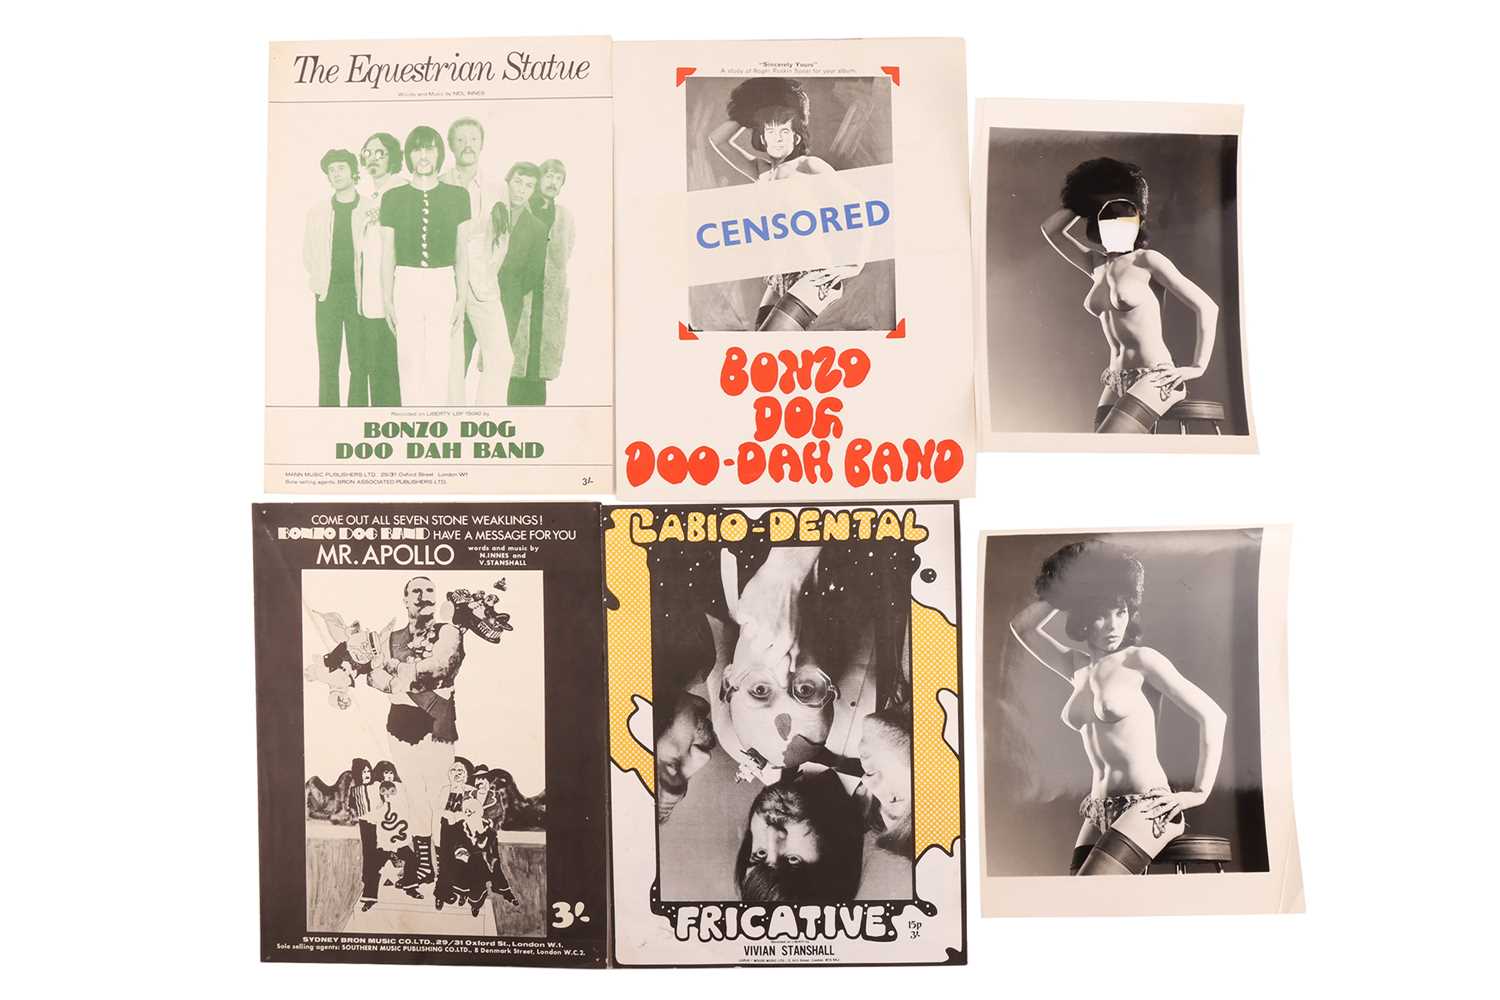 An original Bonzo Dog Doo-Dah Band promotional leaflet, from the collection of Vivian Stanshall, the